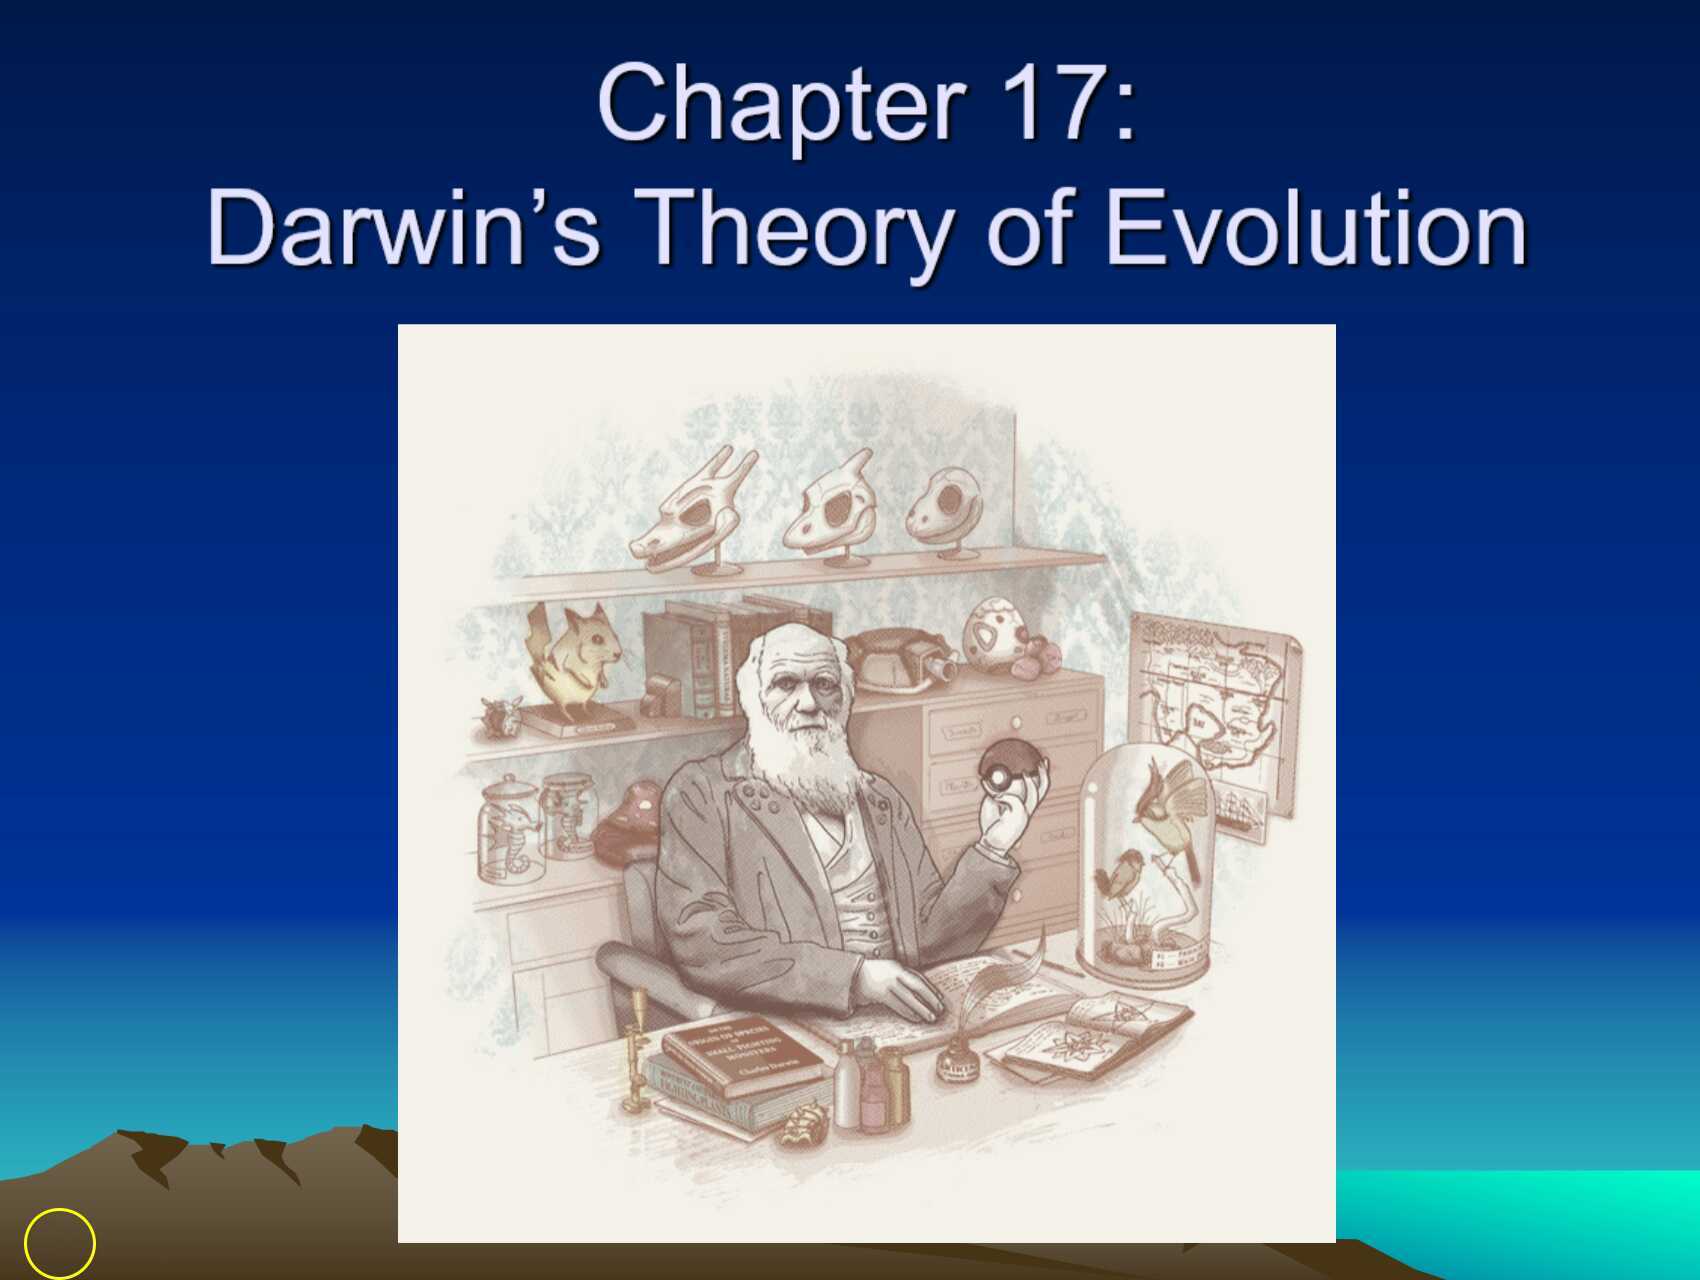 theory of evolution states